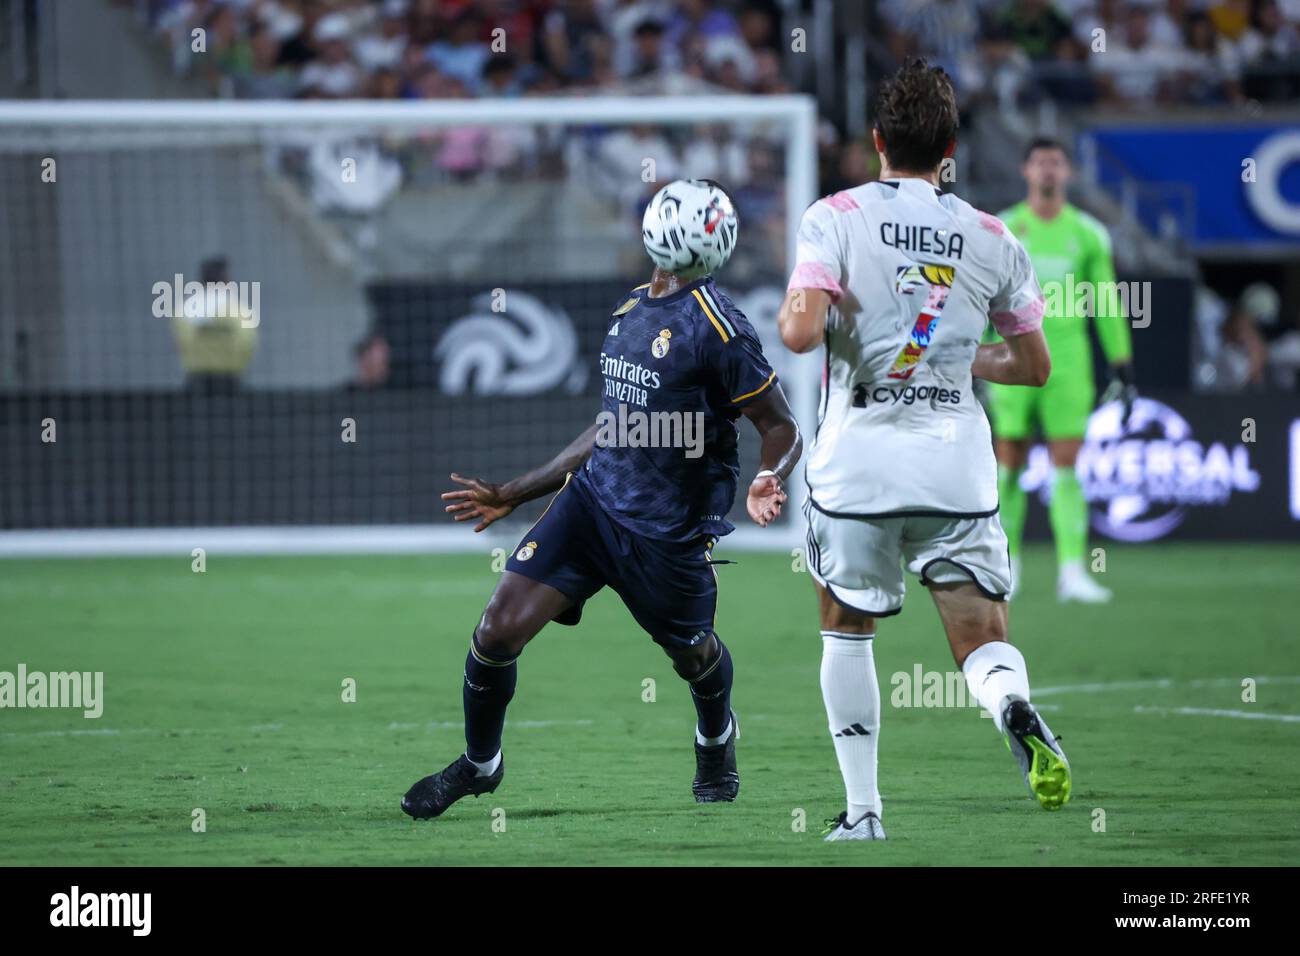 United States this Wednesday, August 2nd. Chiesa of Juventus and Antonio Rüdiger of Real Madrid, International friendly match at Camping World Stadium in the city of Orlando in the United States this Wednesday, August 2nd. Credit: Brazil Photo Press/Alamy Live News Stock Photo